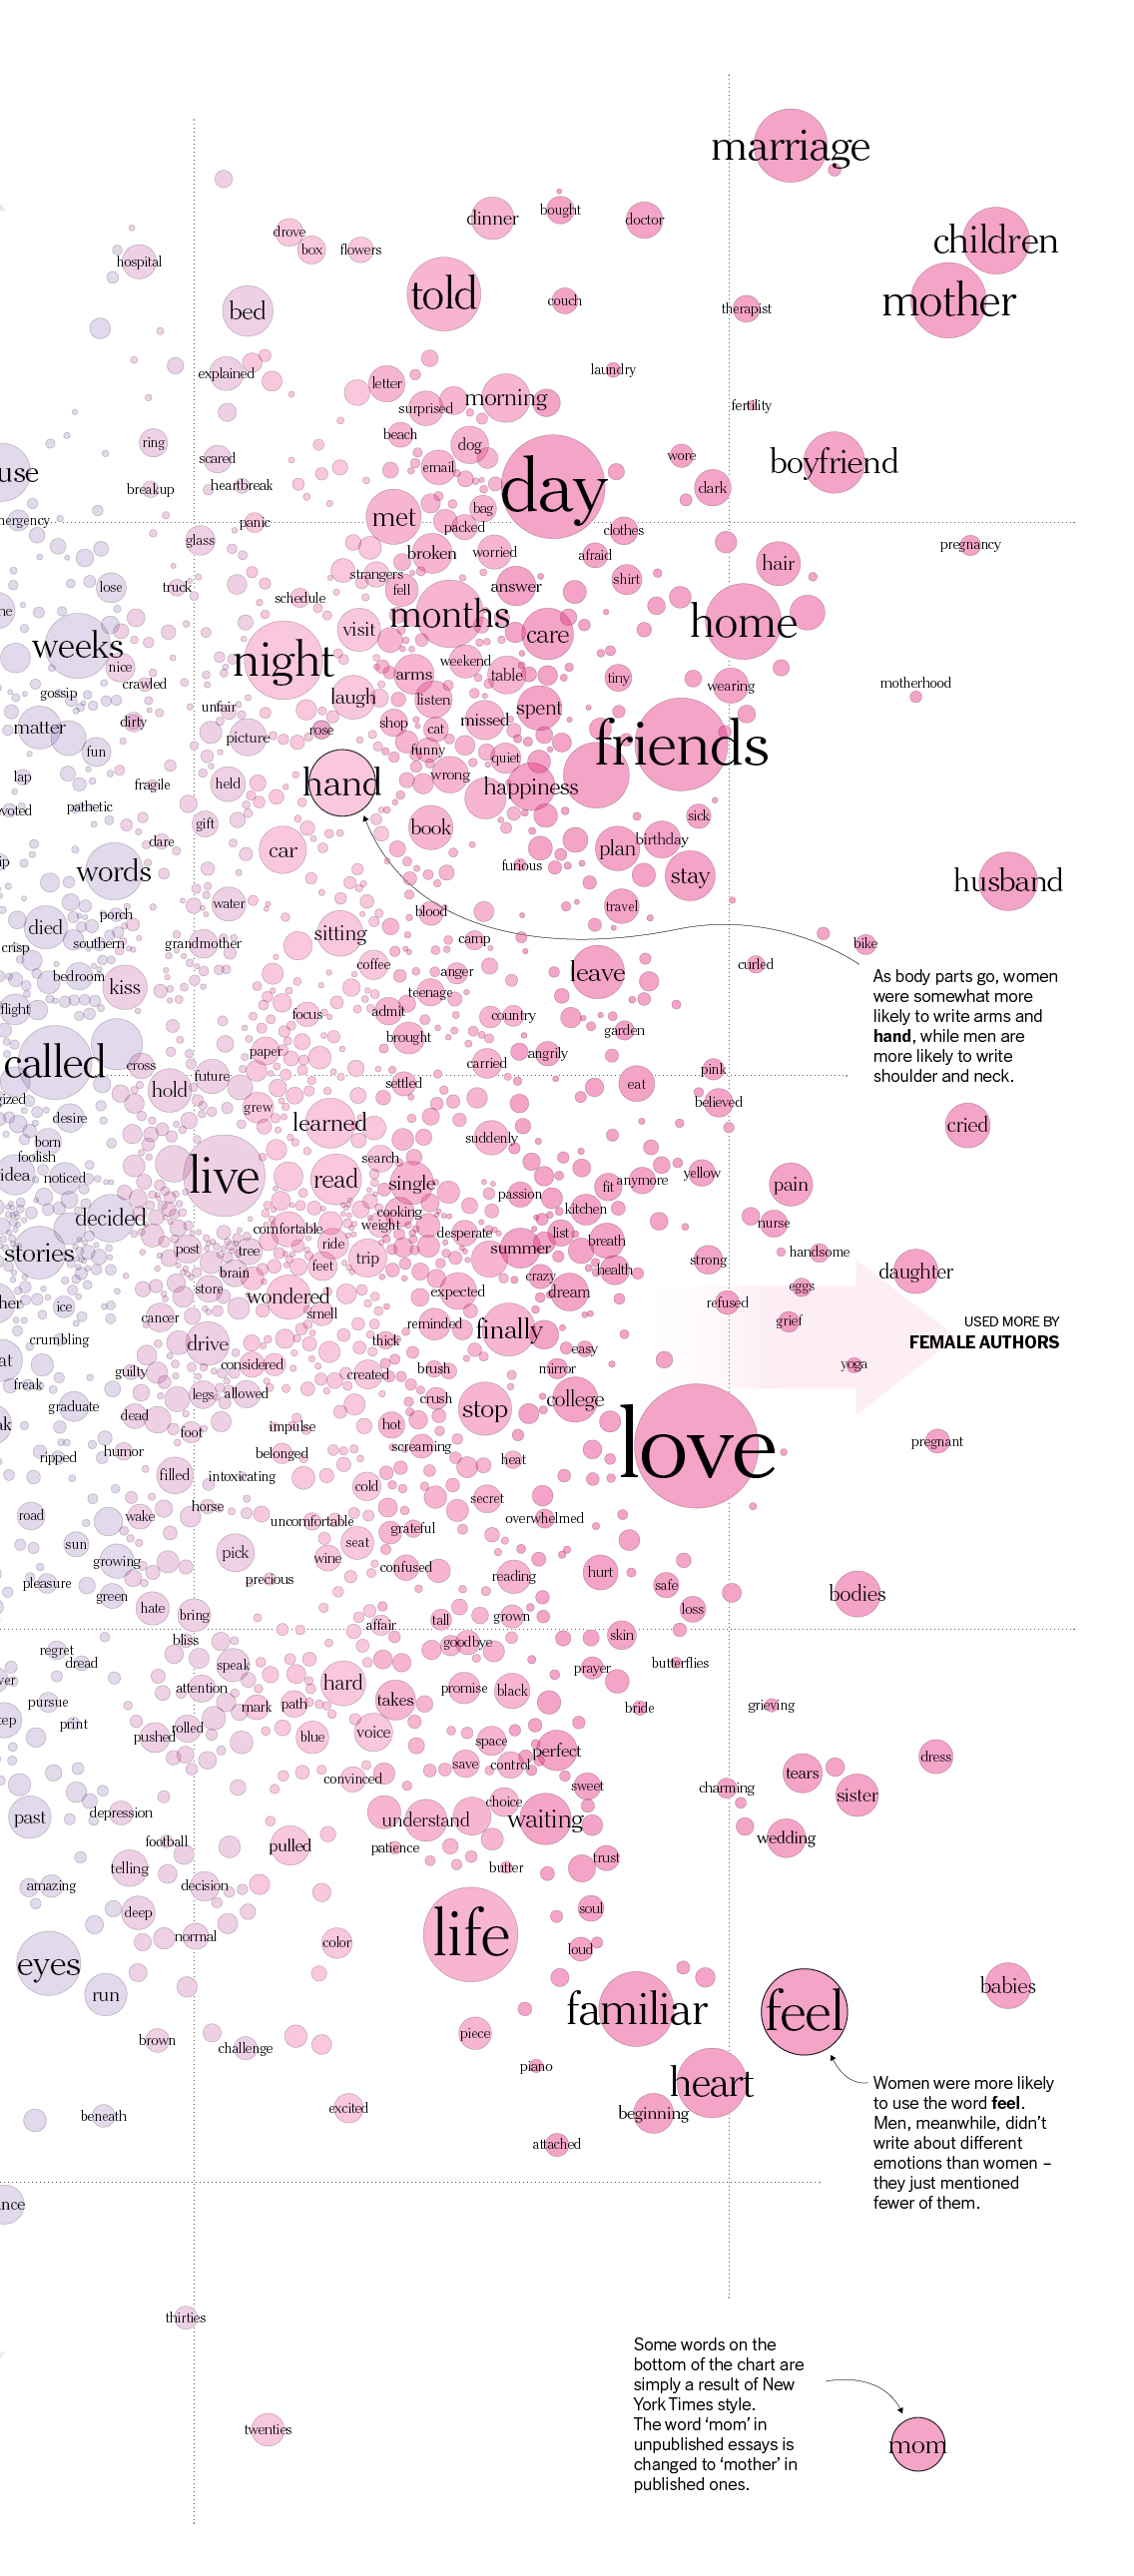 Study Reveals What Words Men And Women Use To Write About Love, And The Difference Is Striking